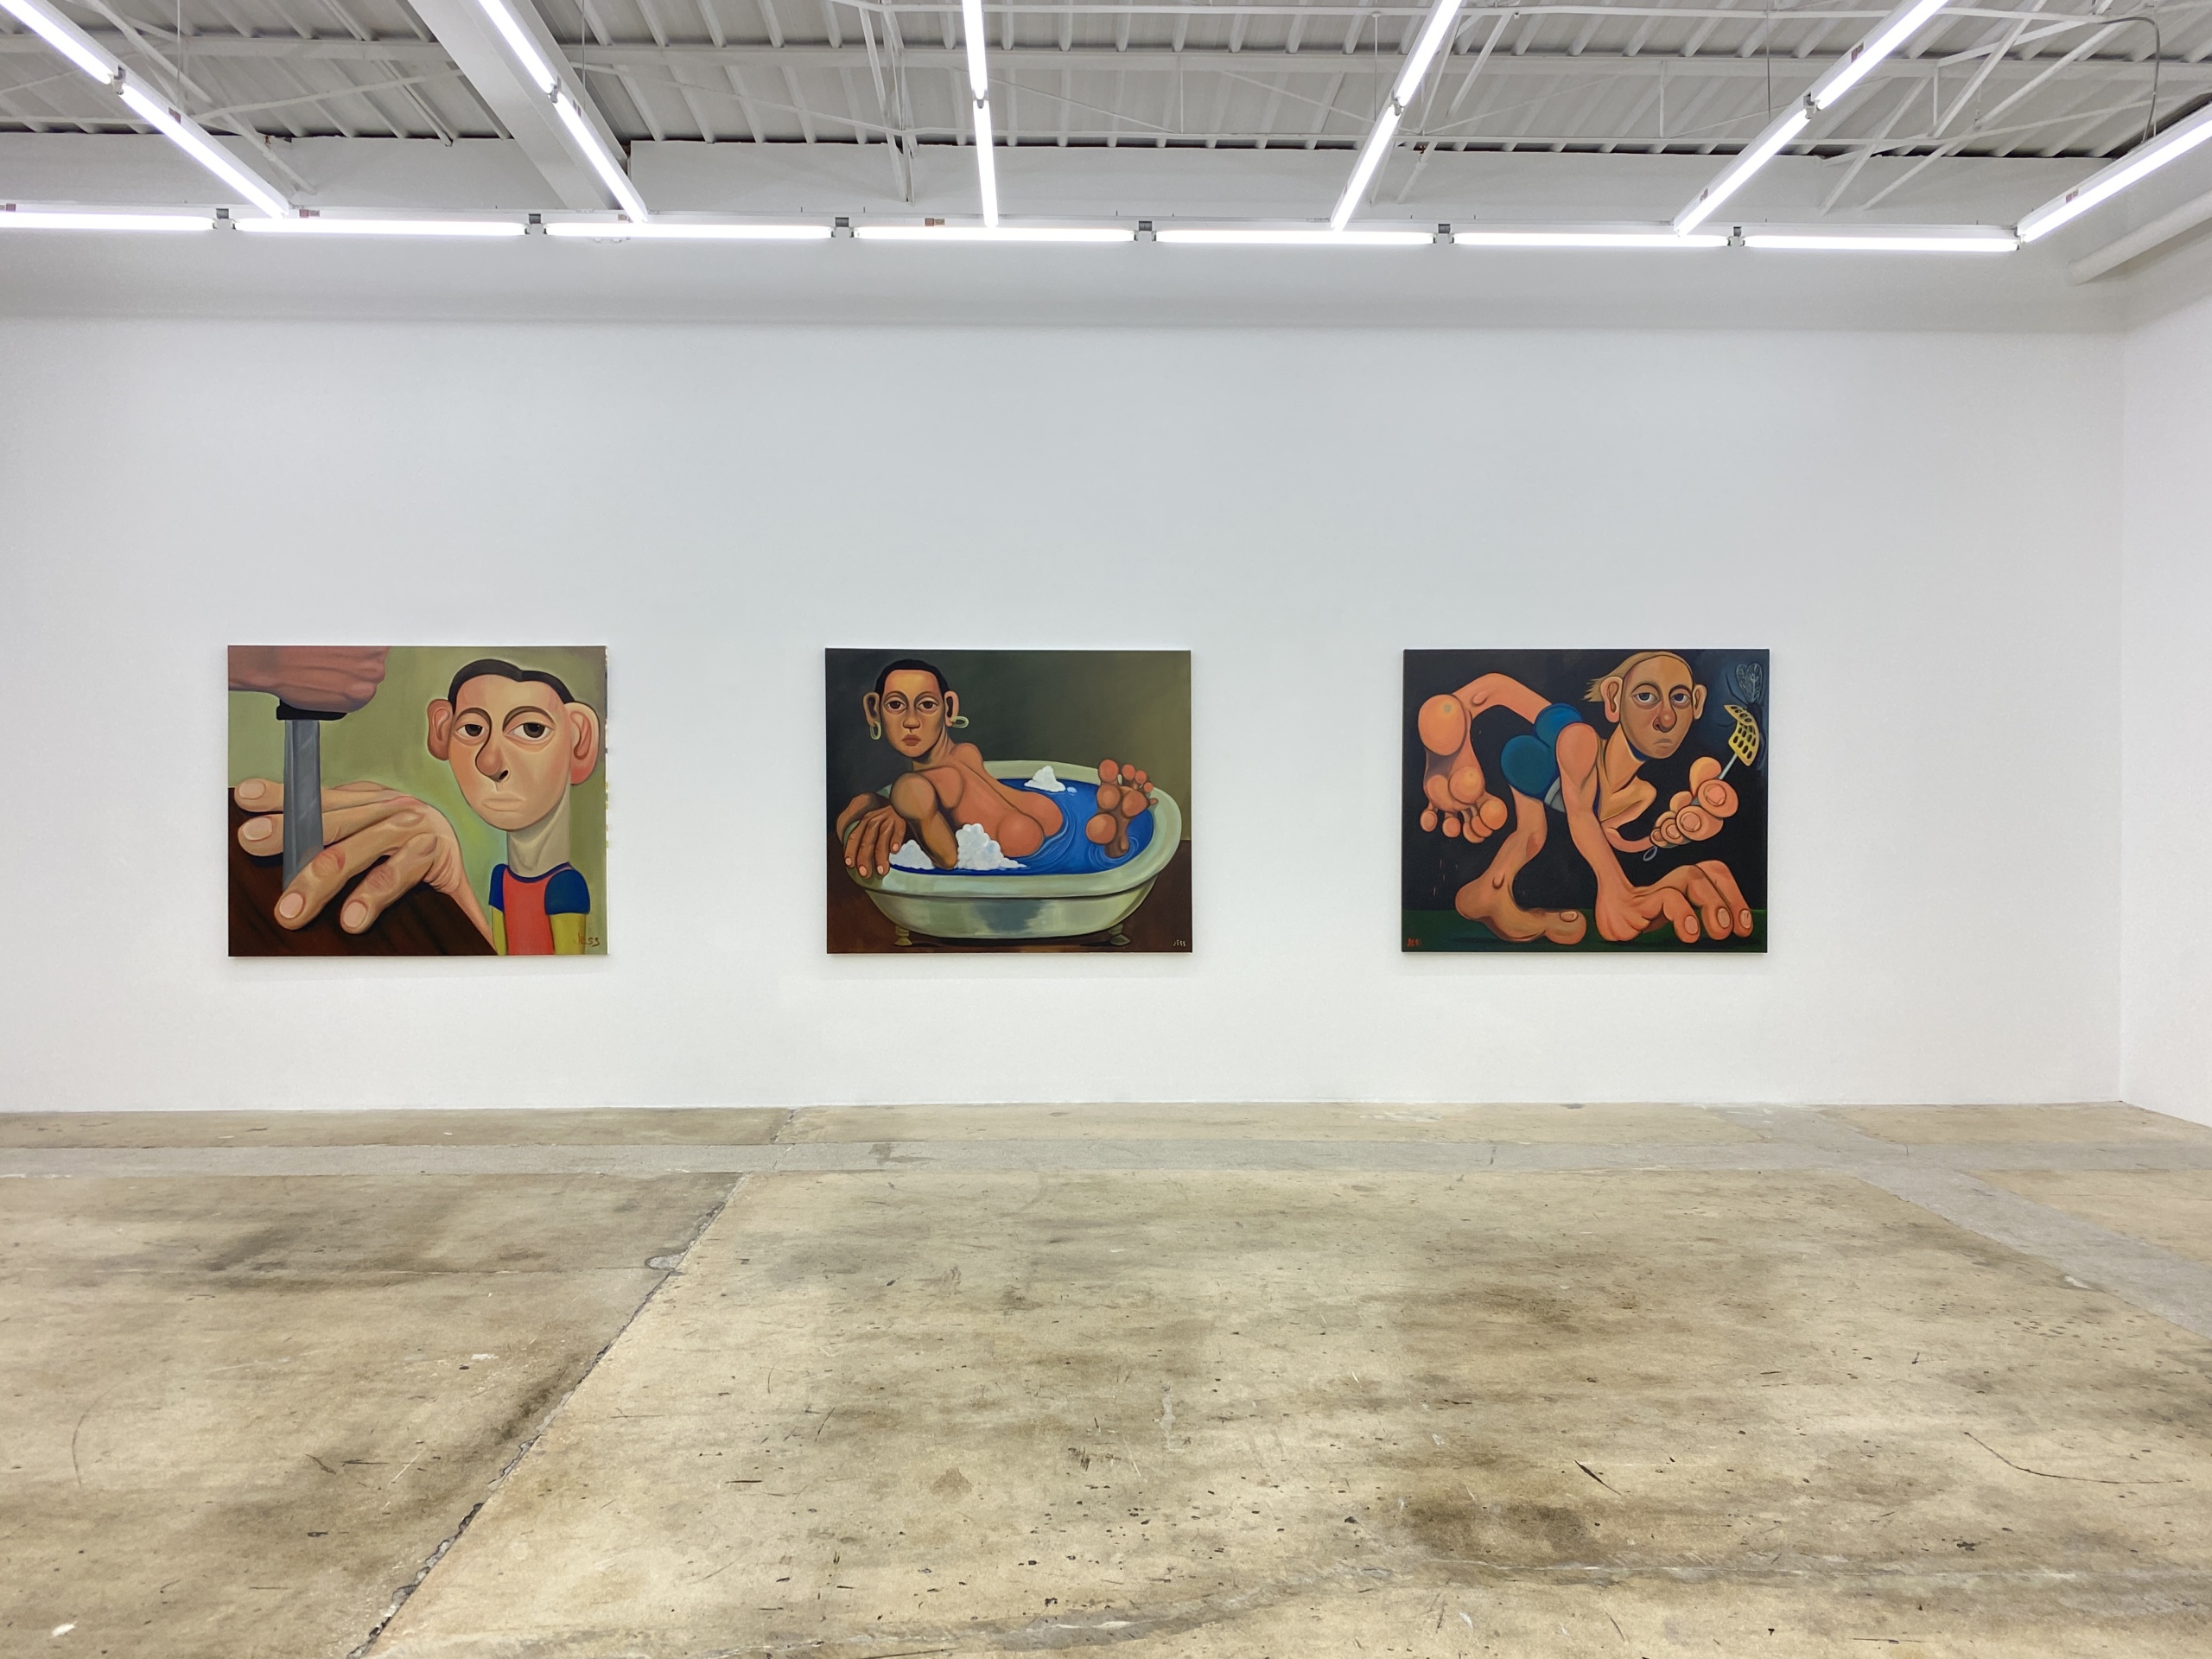 Jess Valice's paintings at Bill Brady Gallery in Miami.